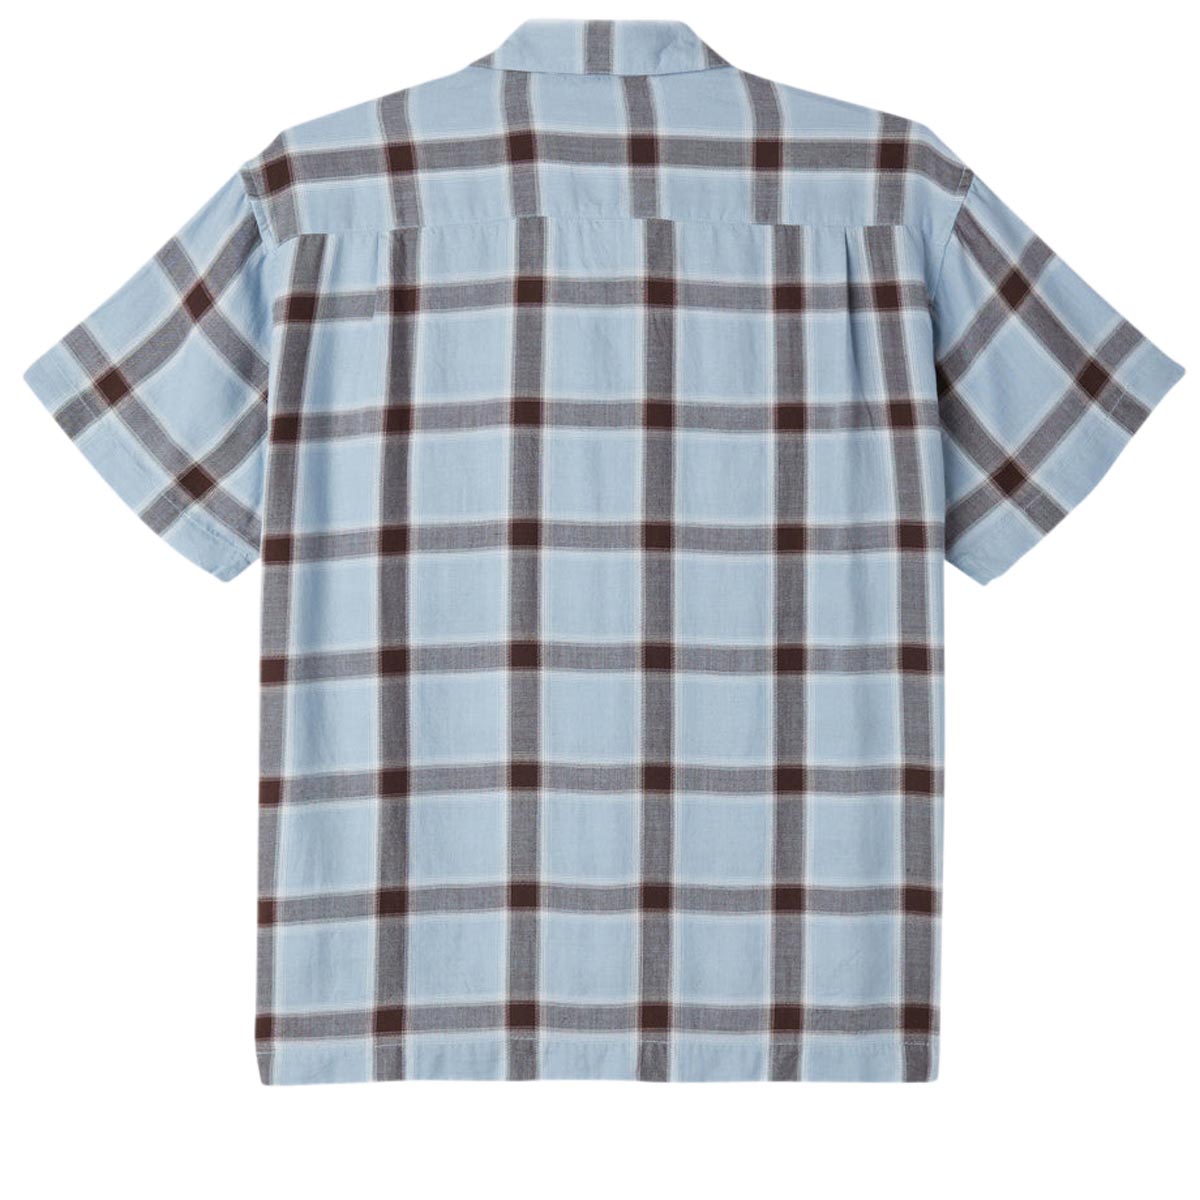 Obey Ambient Woven Shirt - Good Grey Multi image 2